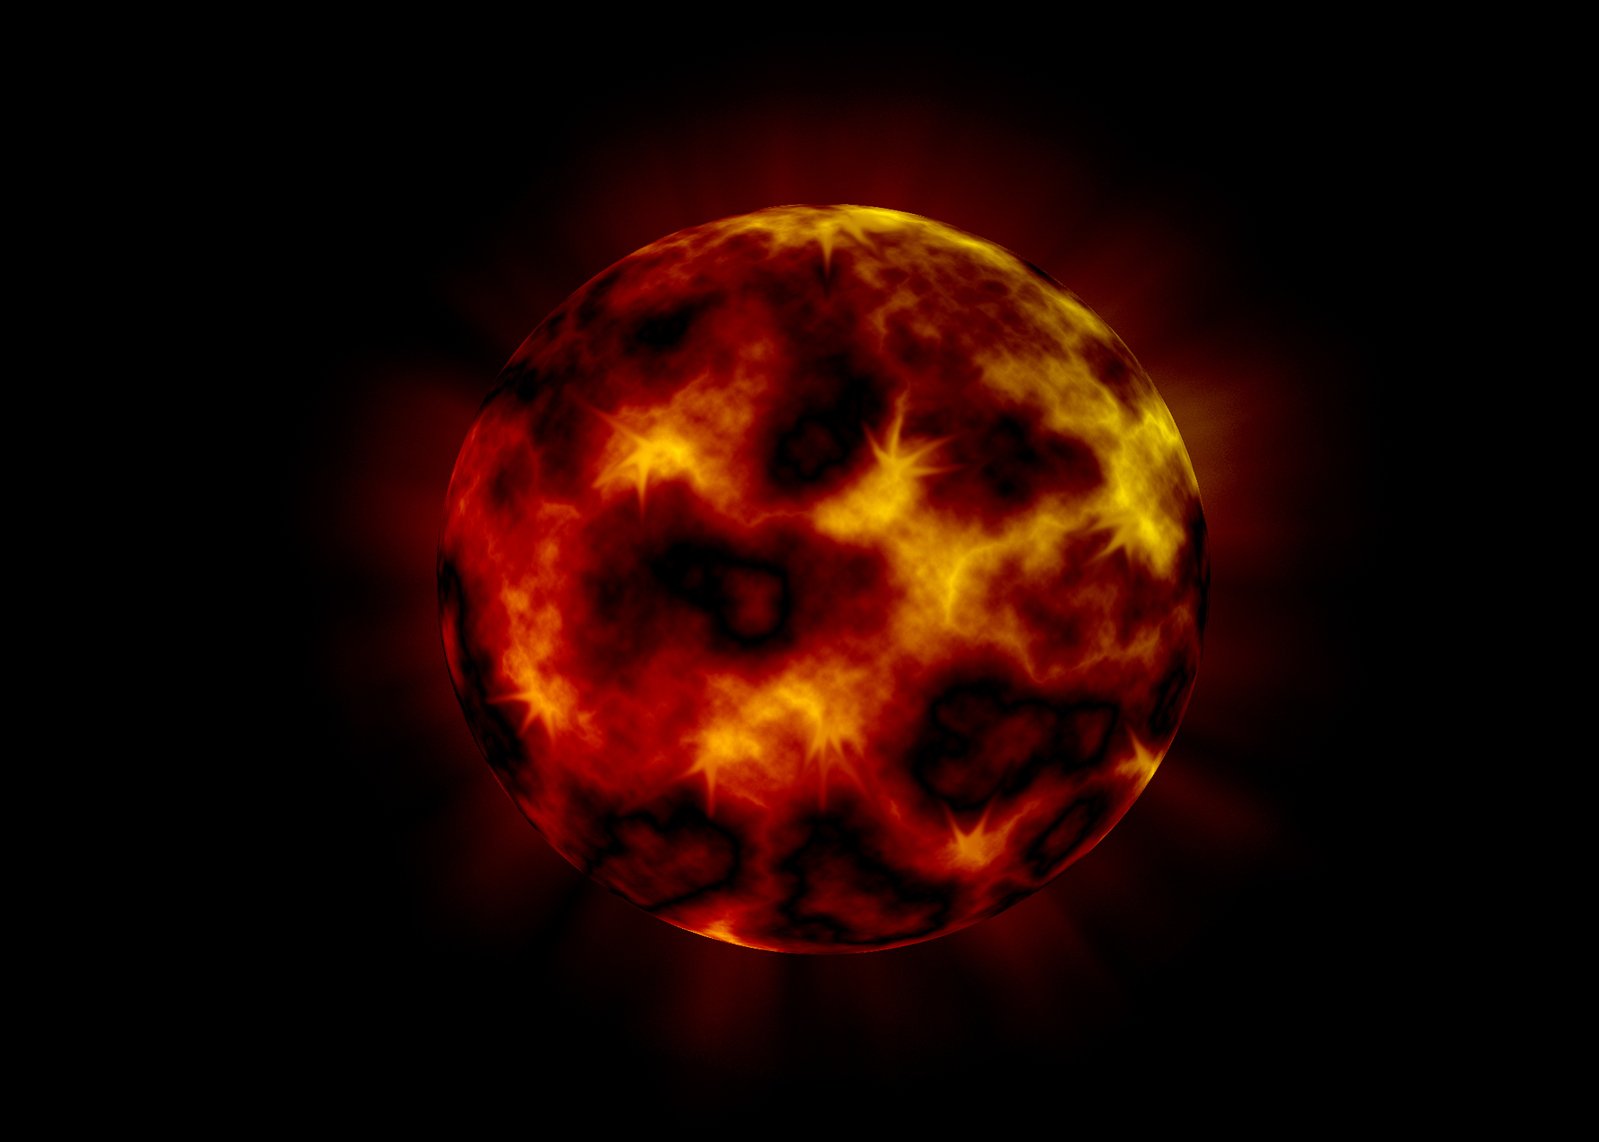 an abstractly designed image of the sun in red and yellow